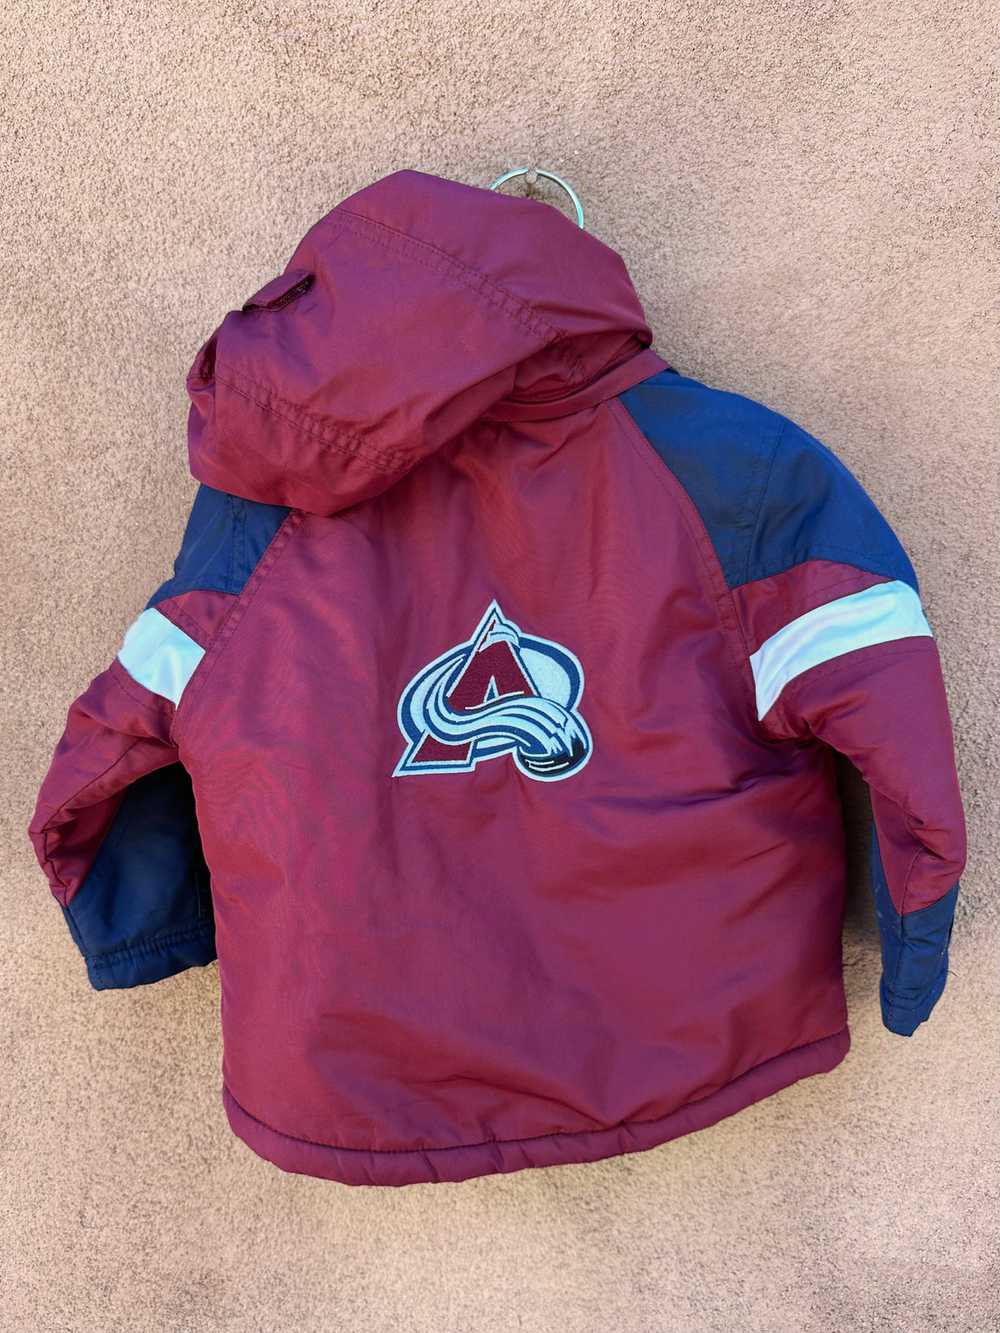 Kid's Colorado Avalanche Puffer Jacket - image 2